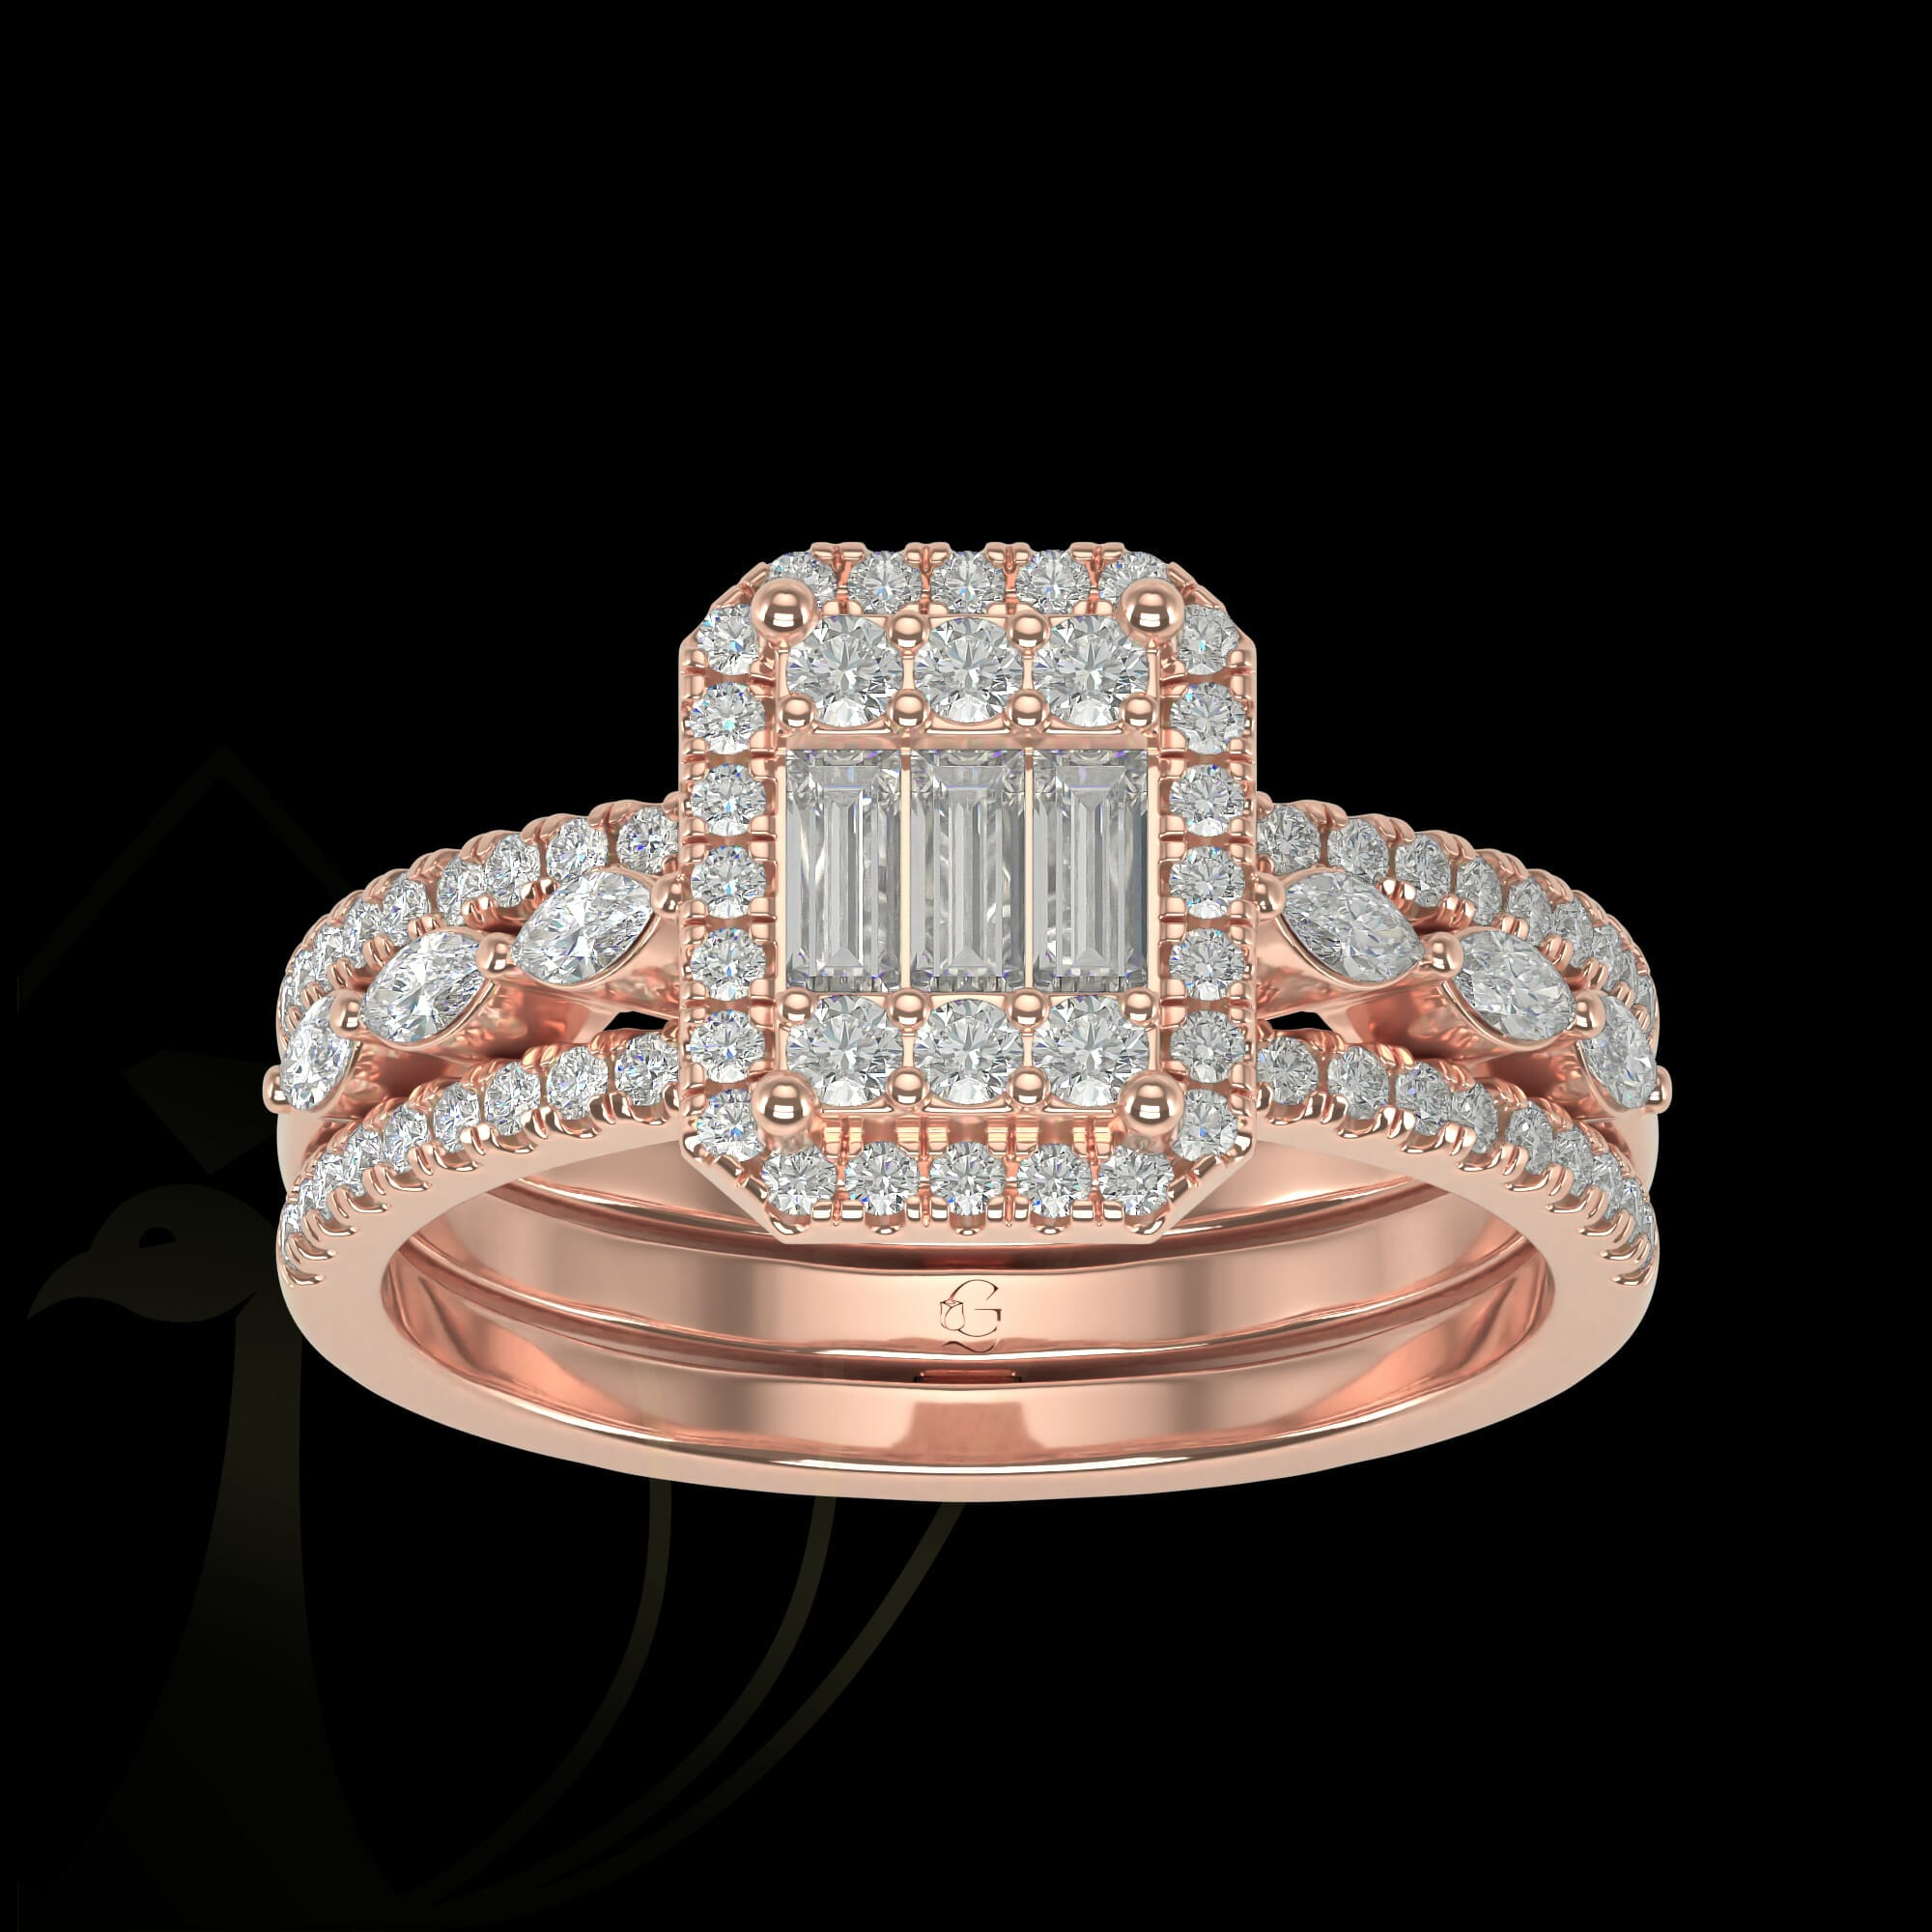 Shining Glory Diamond Ring from our exclusive Gulz Collection